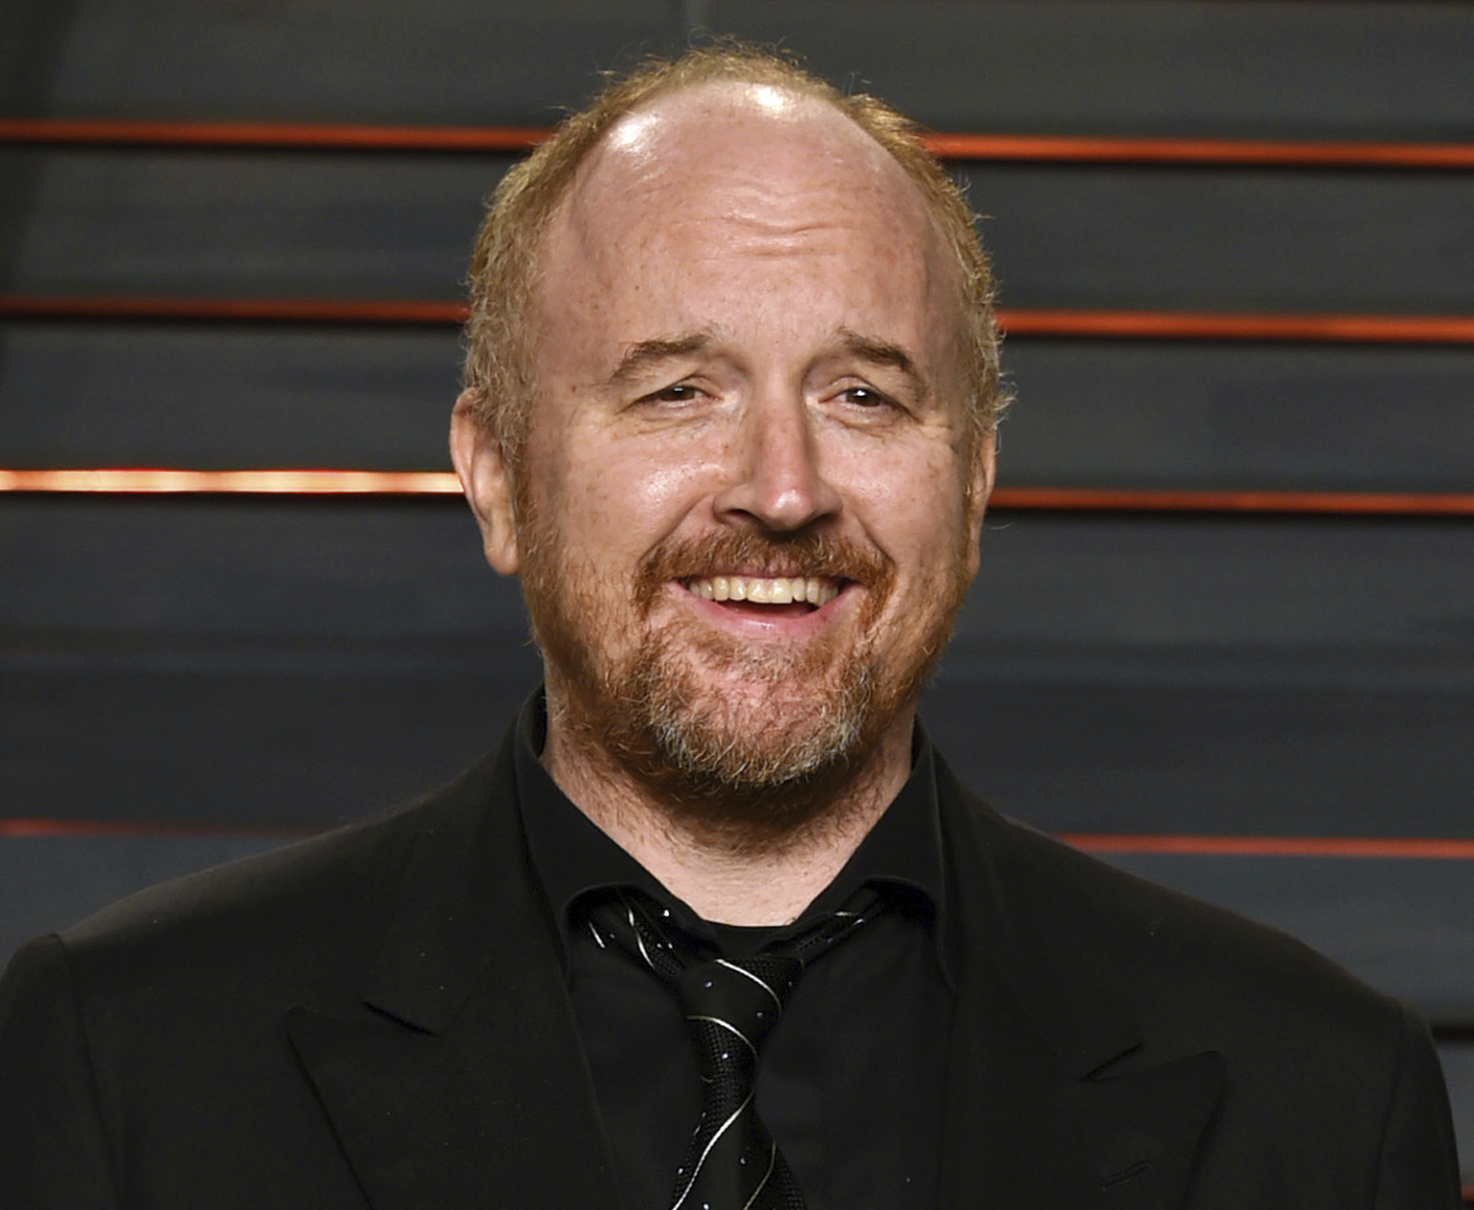 Commentary: Comedian Louis C.K. — America's unlikely conscience on abortion?